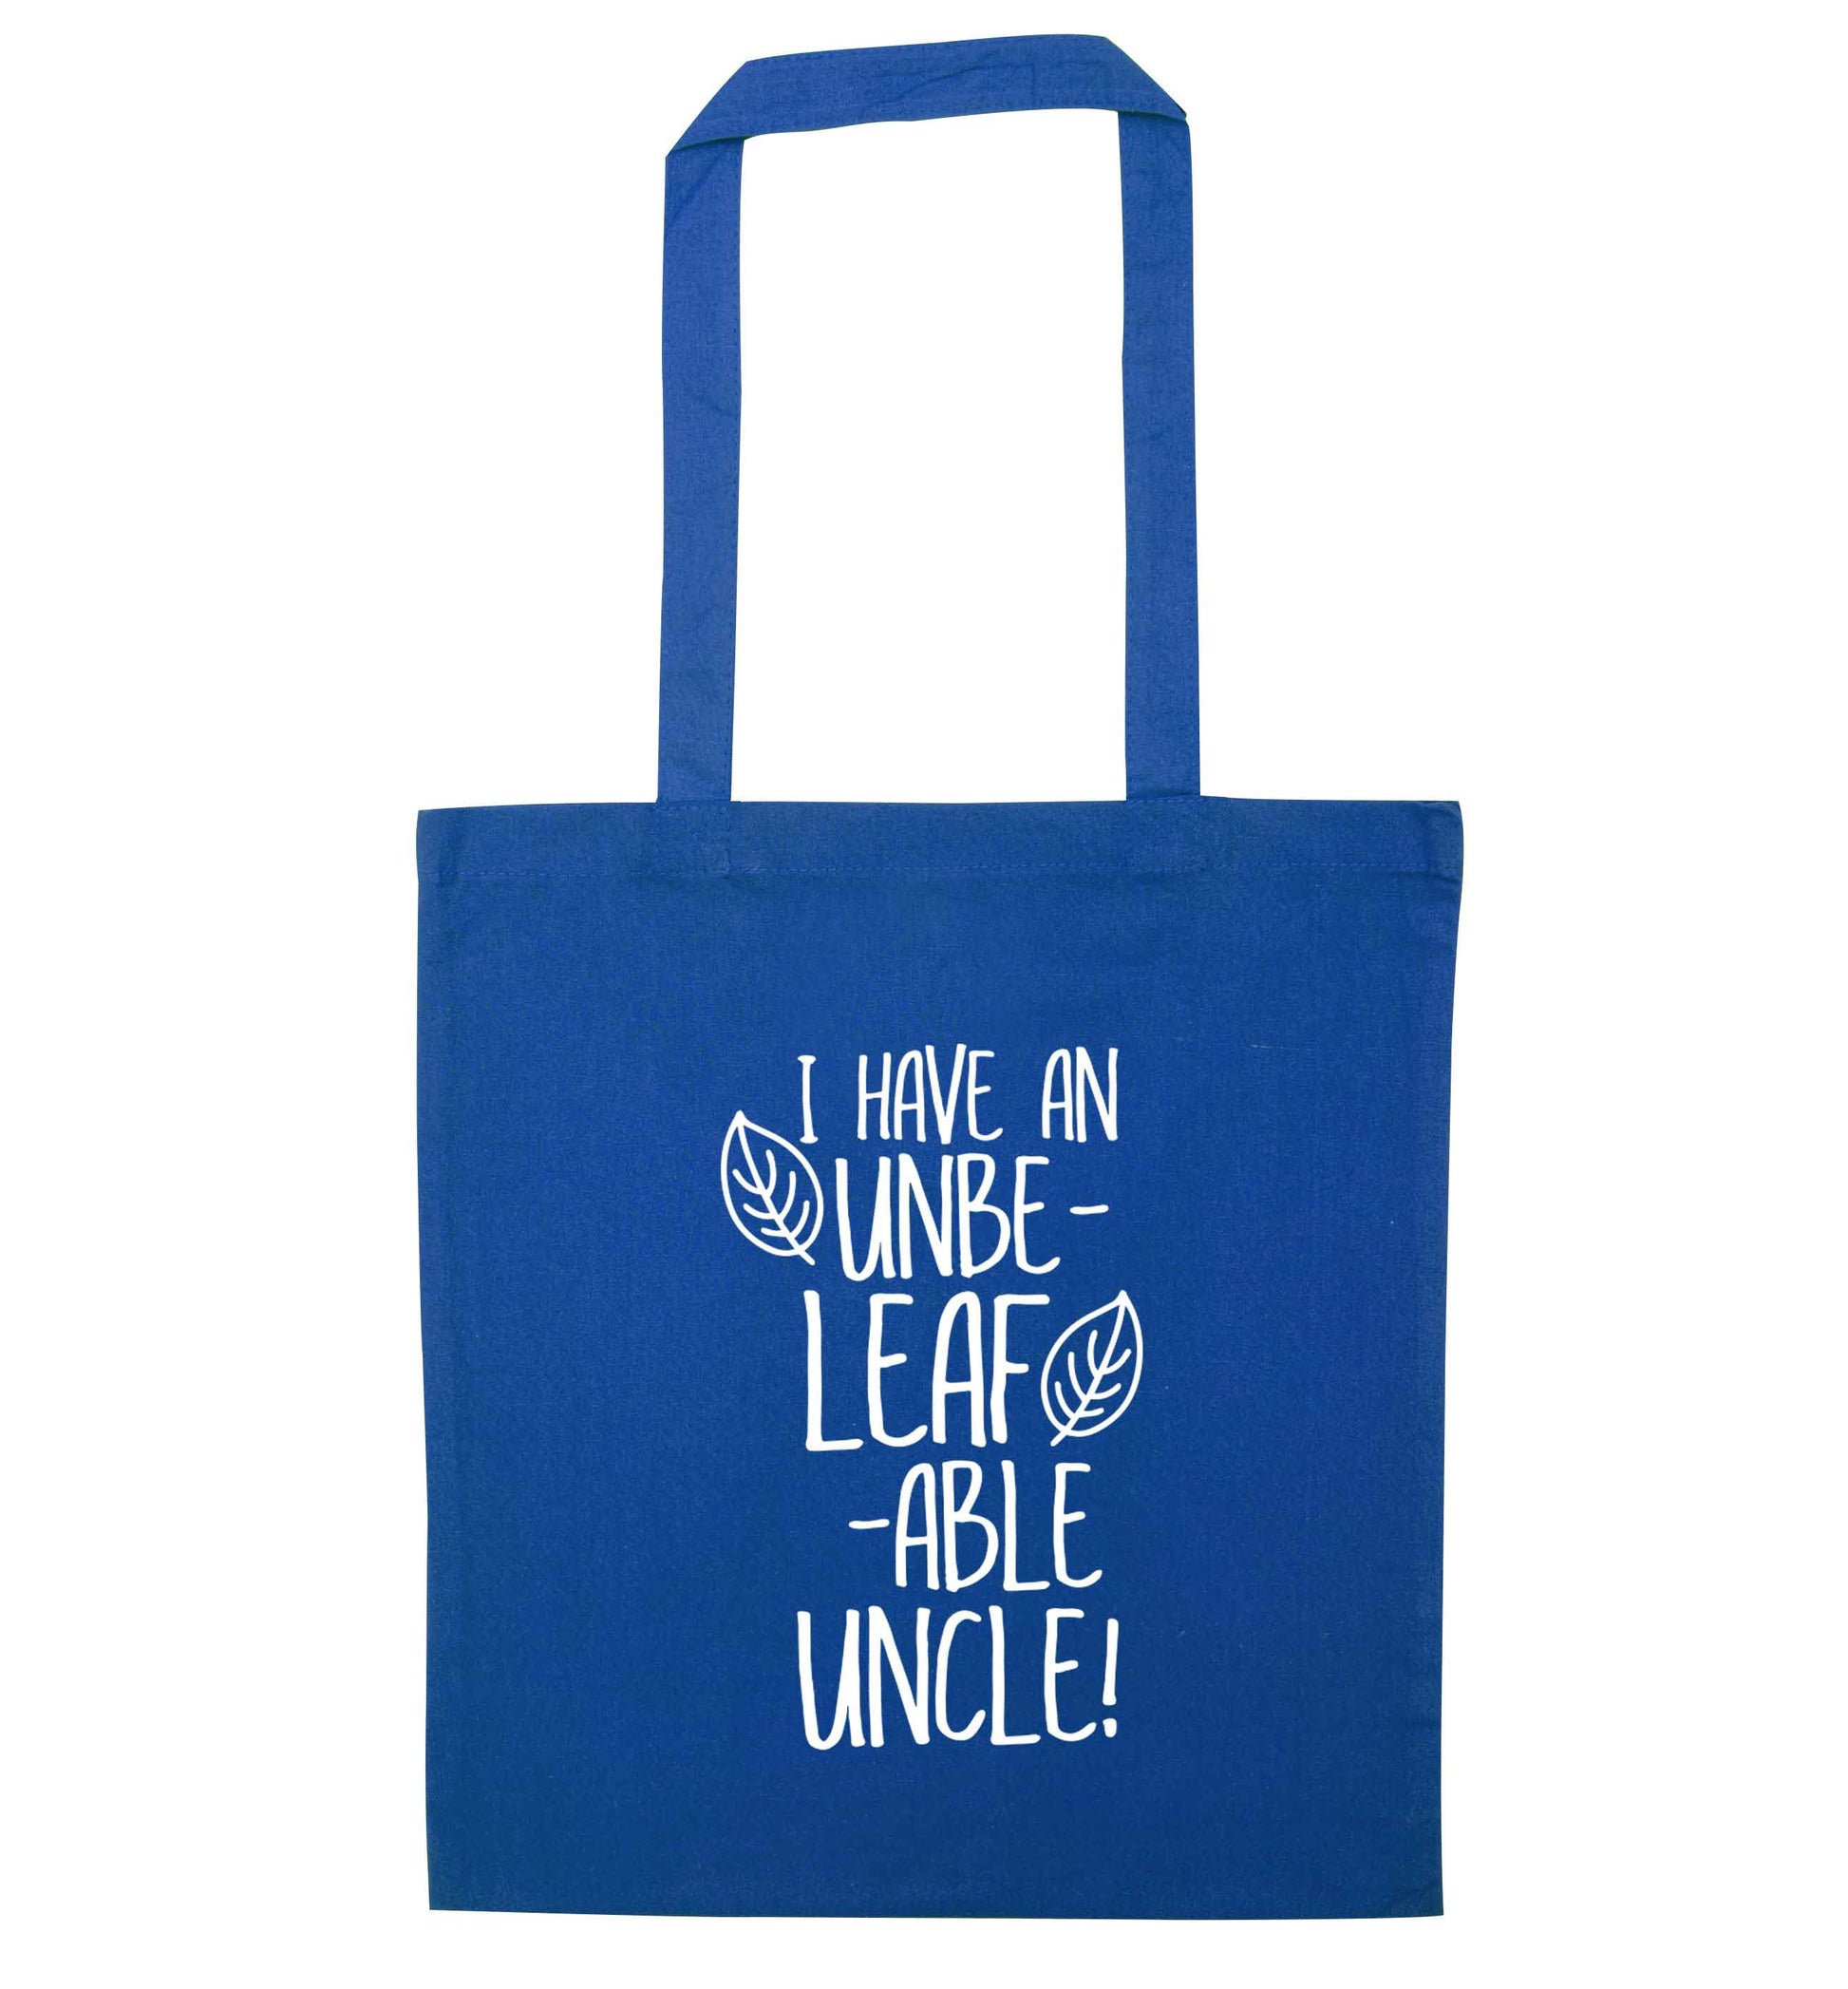 I have an unbe-leaf-able uncle blue tote bag